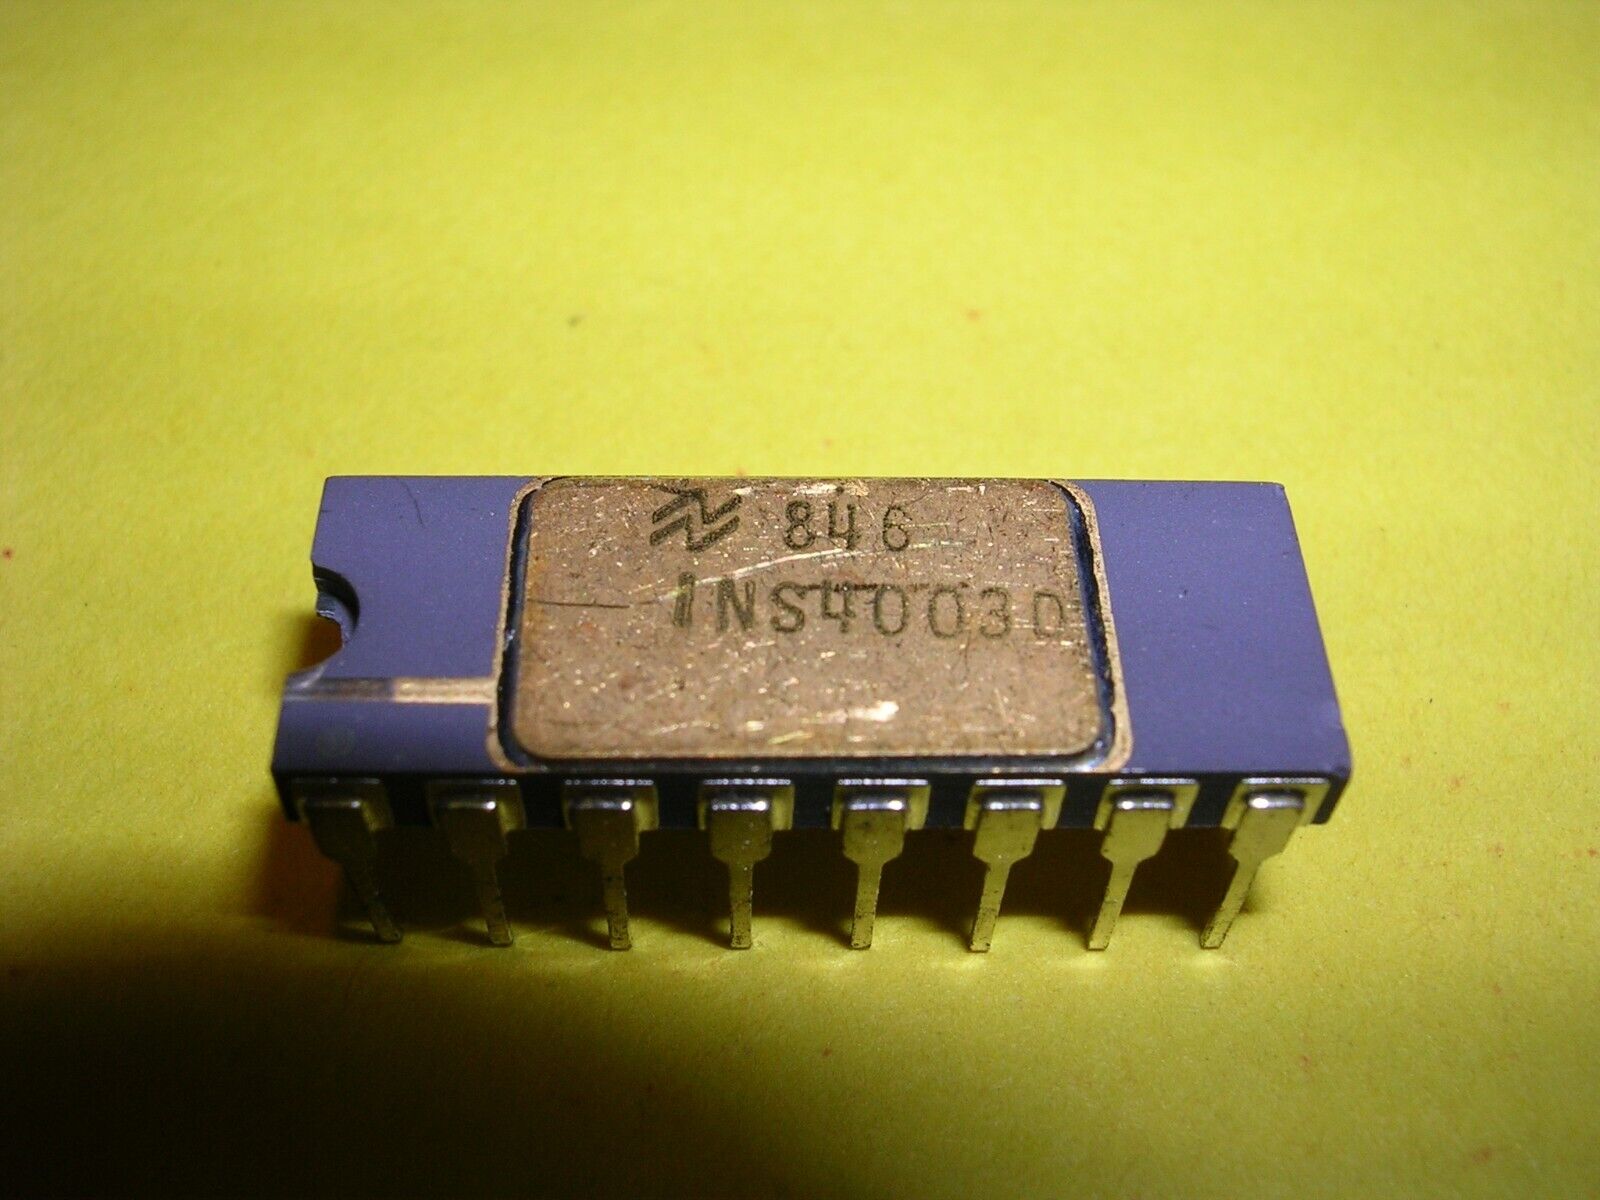 National Semiconductor INS4003D (INS4003) Chip for 4004 / C4004 / MCS-4, Type 1